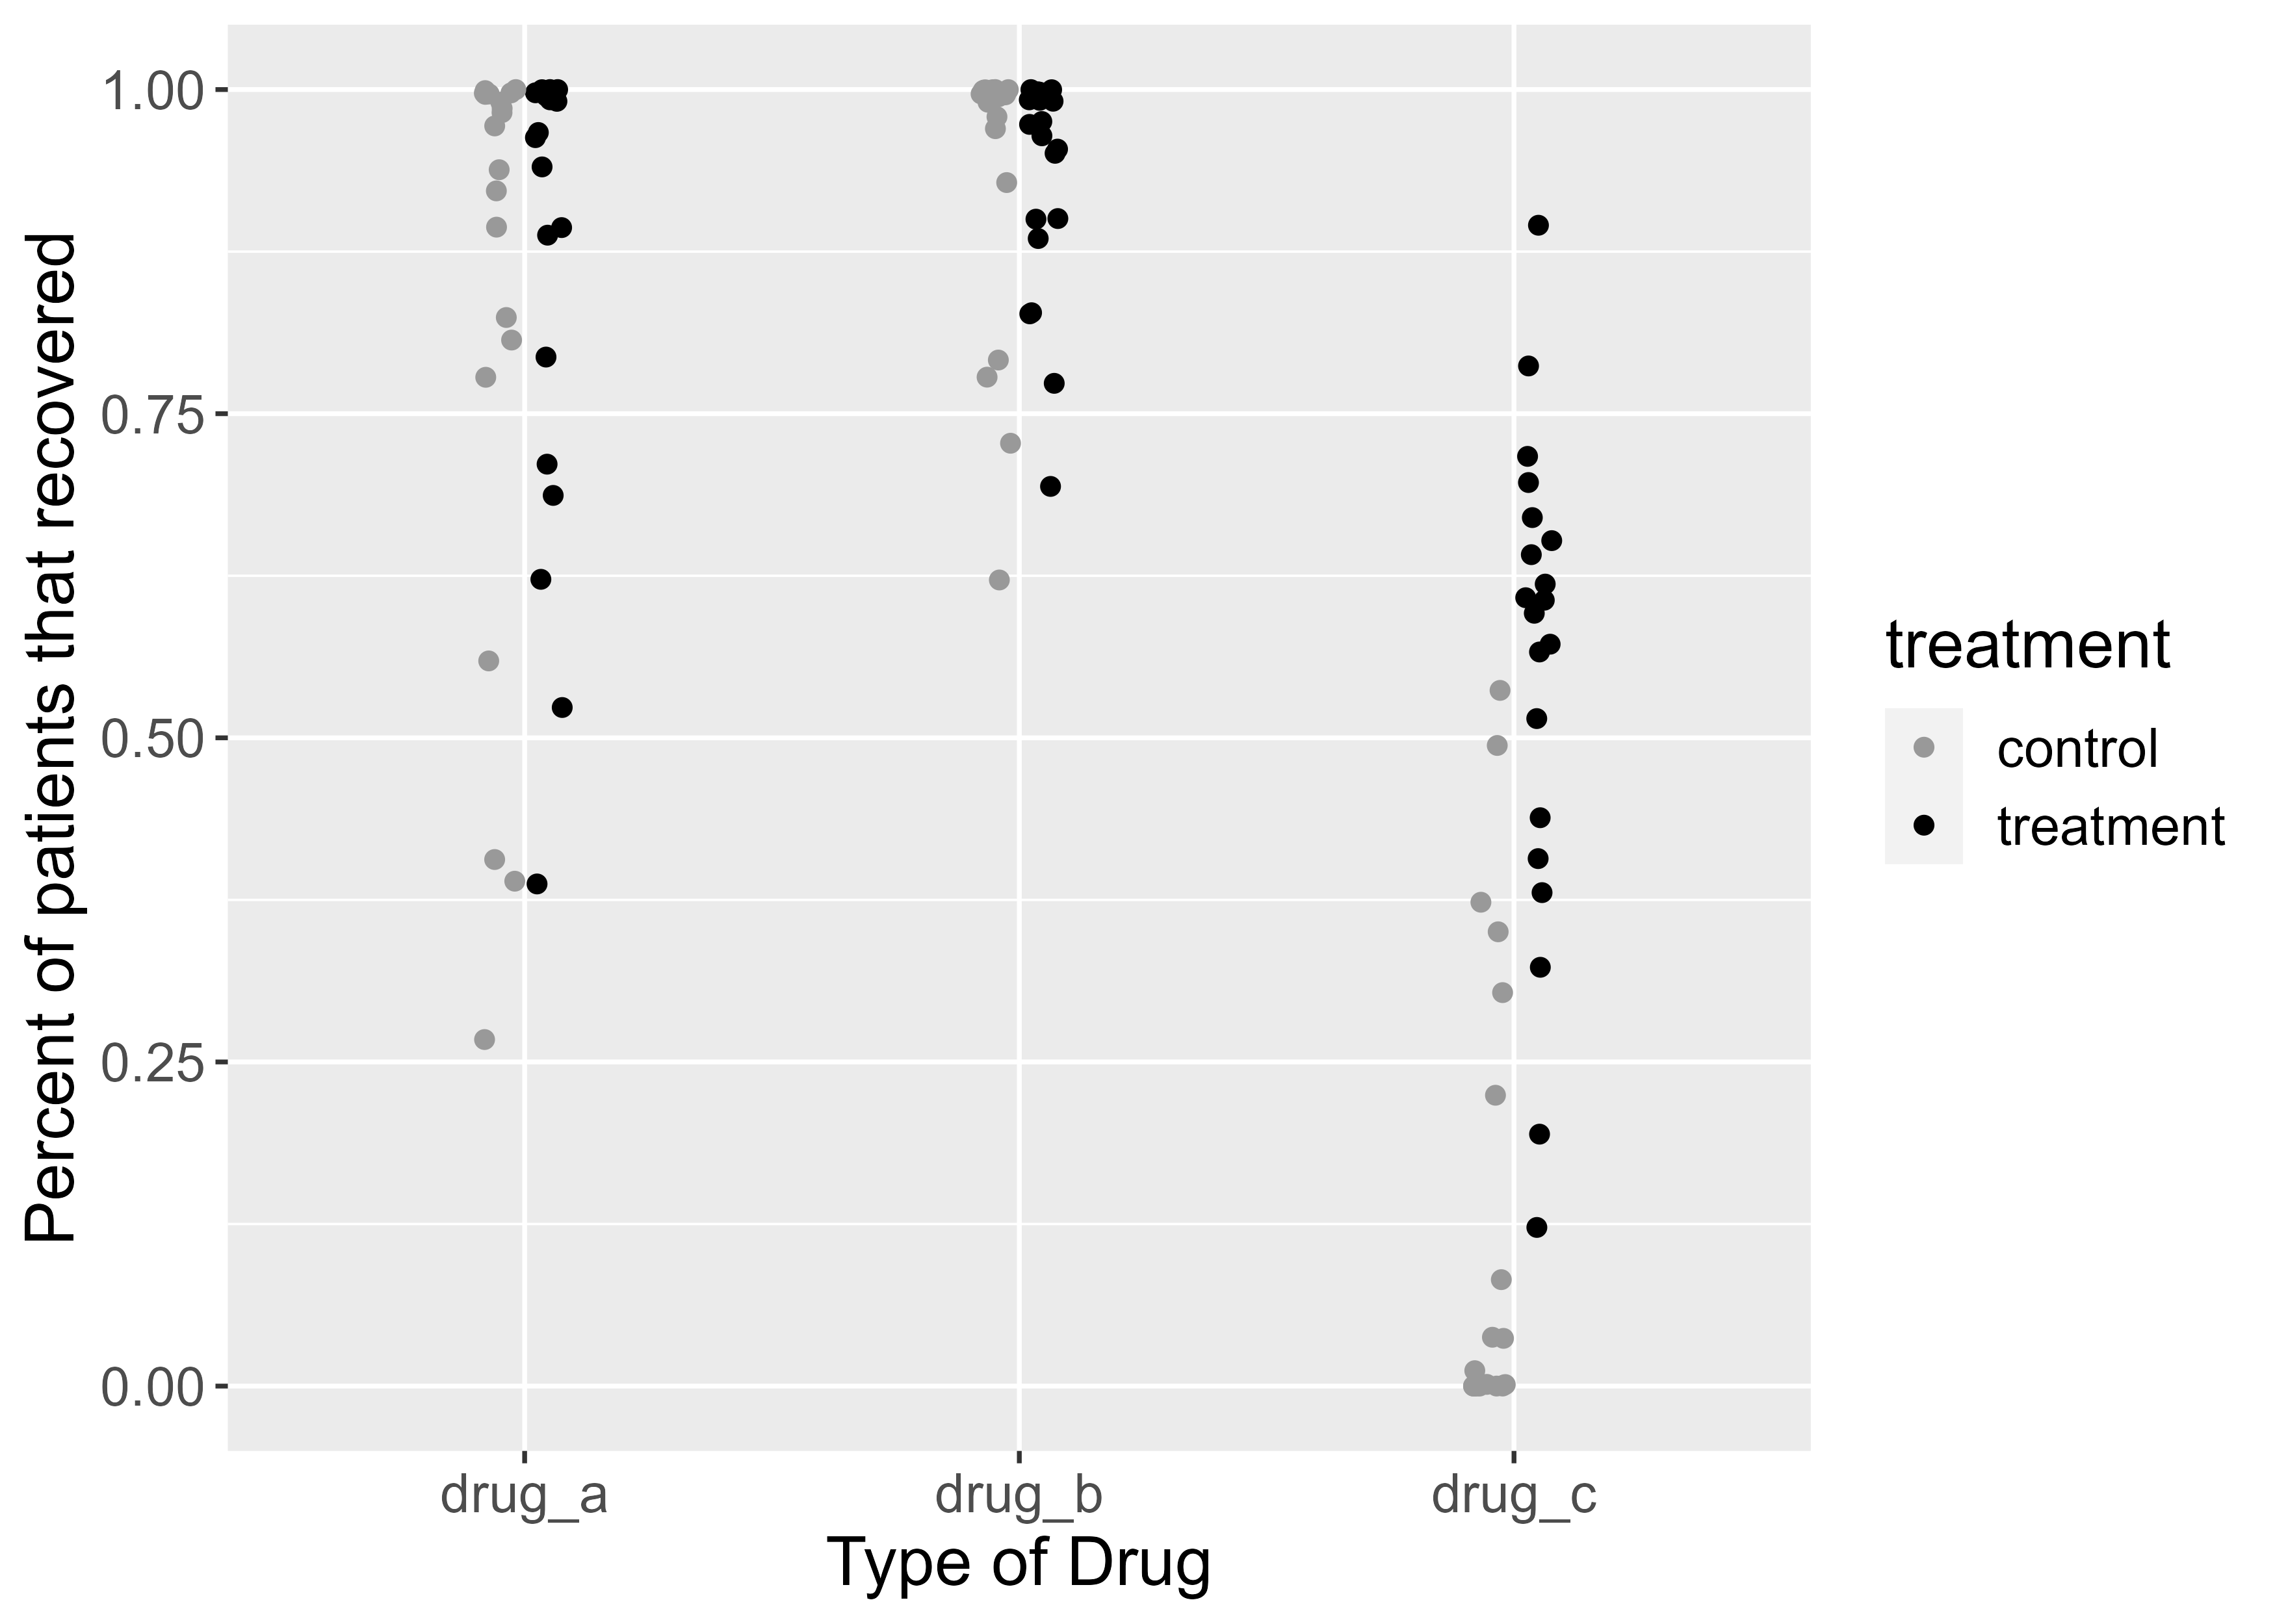 Proportion of patients that recovered from a disease after taking one of three drugs. Each dot represents the outcome of a single experiment (i.e. trial).